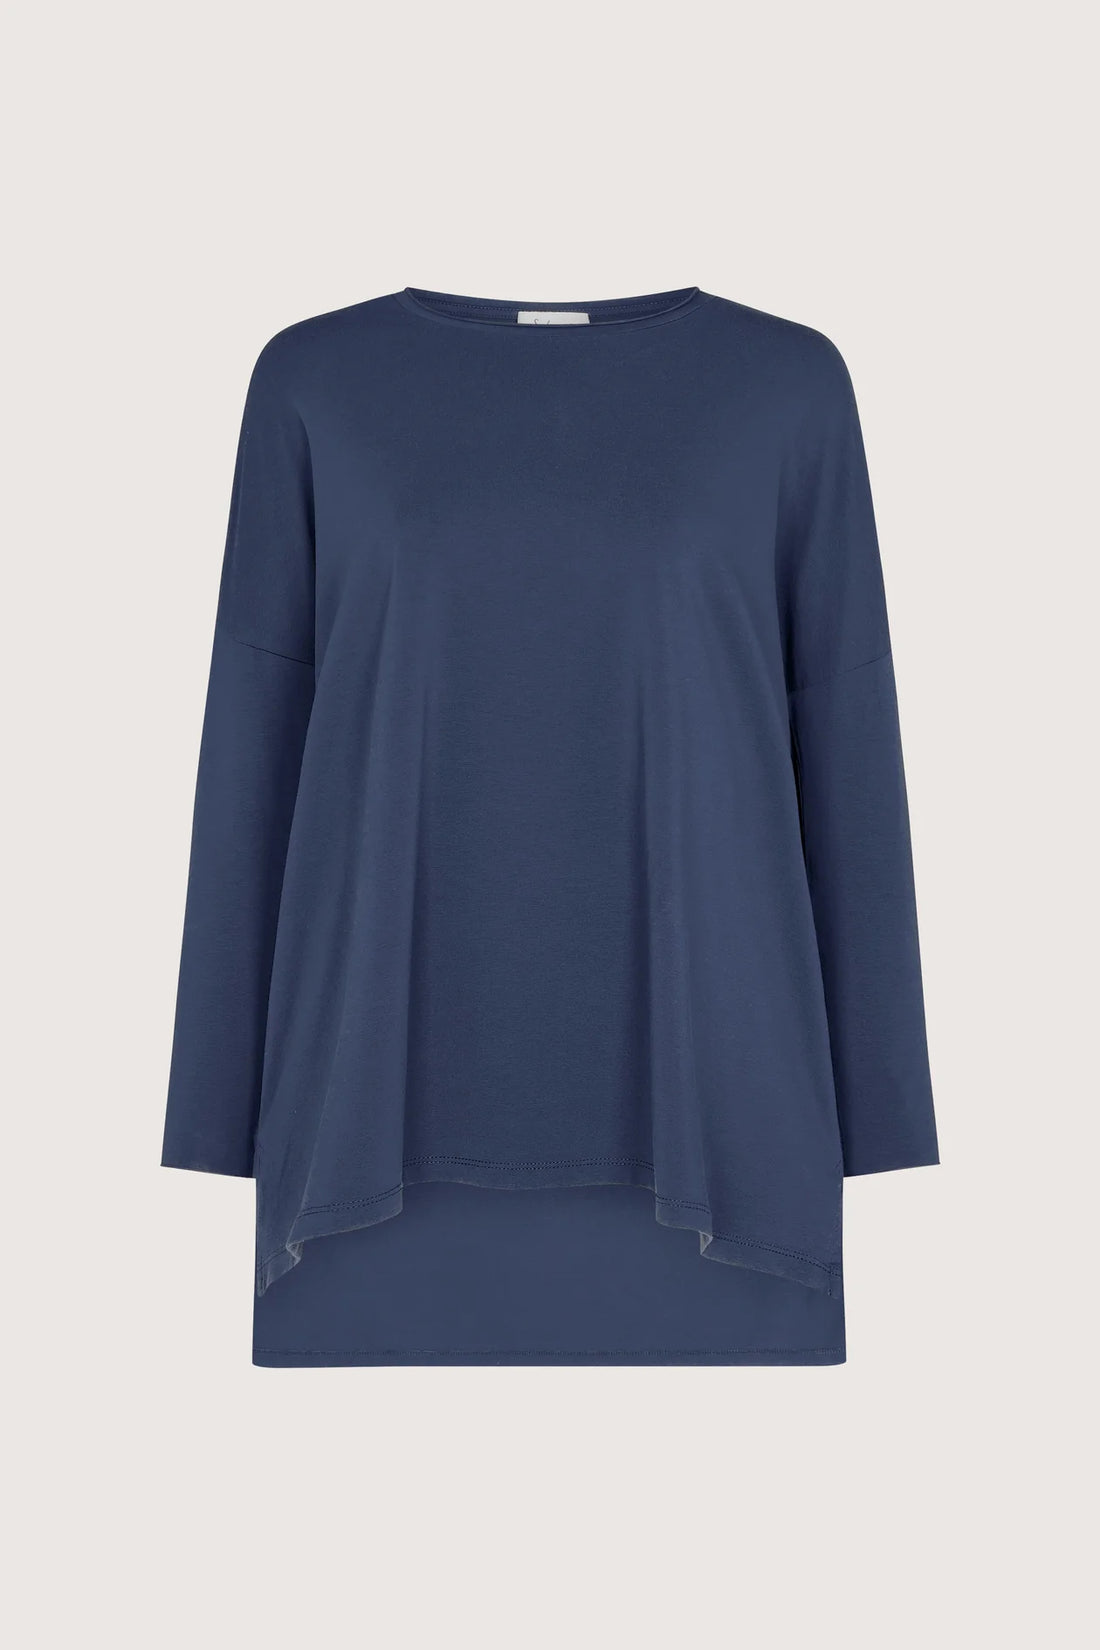 Sahara Cotton Jersey Relaxed Top -30% at Checkout